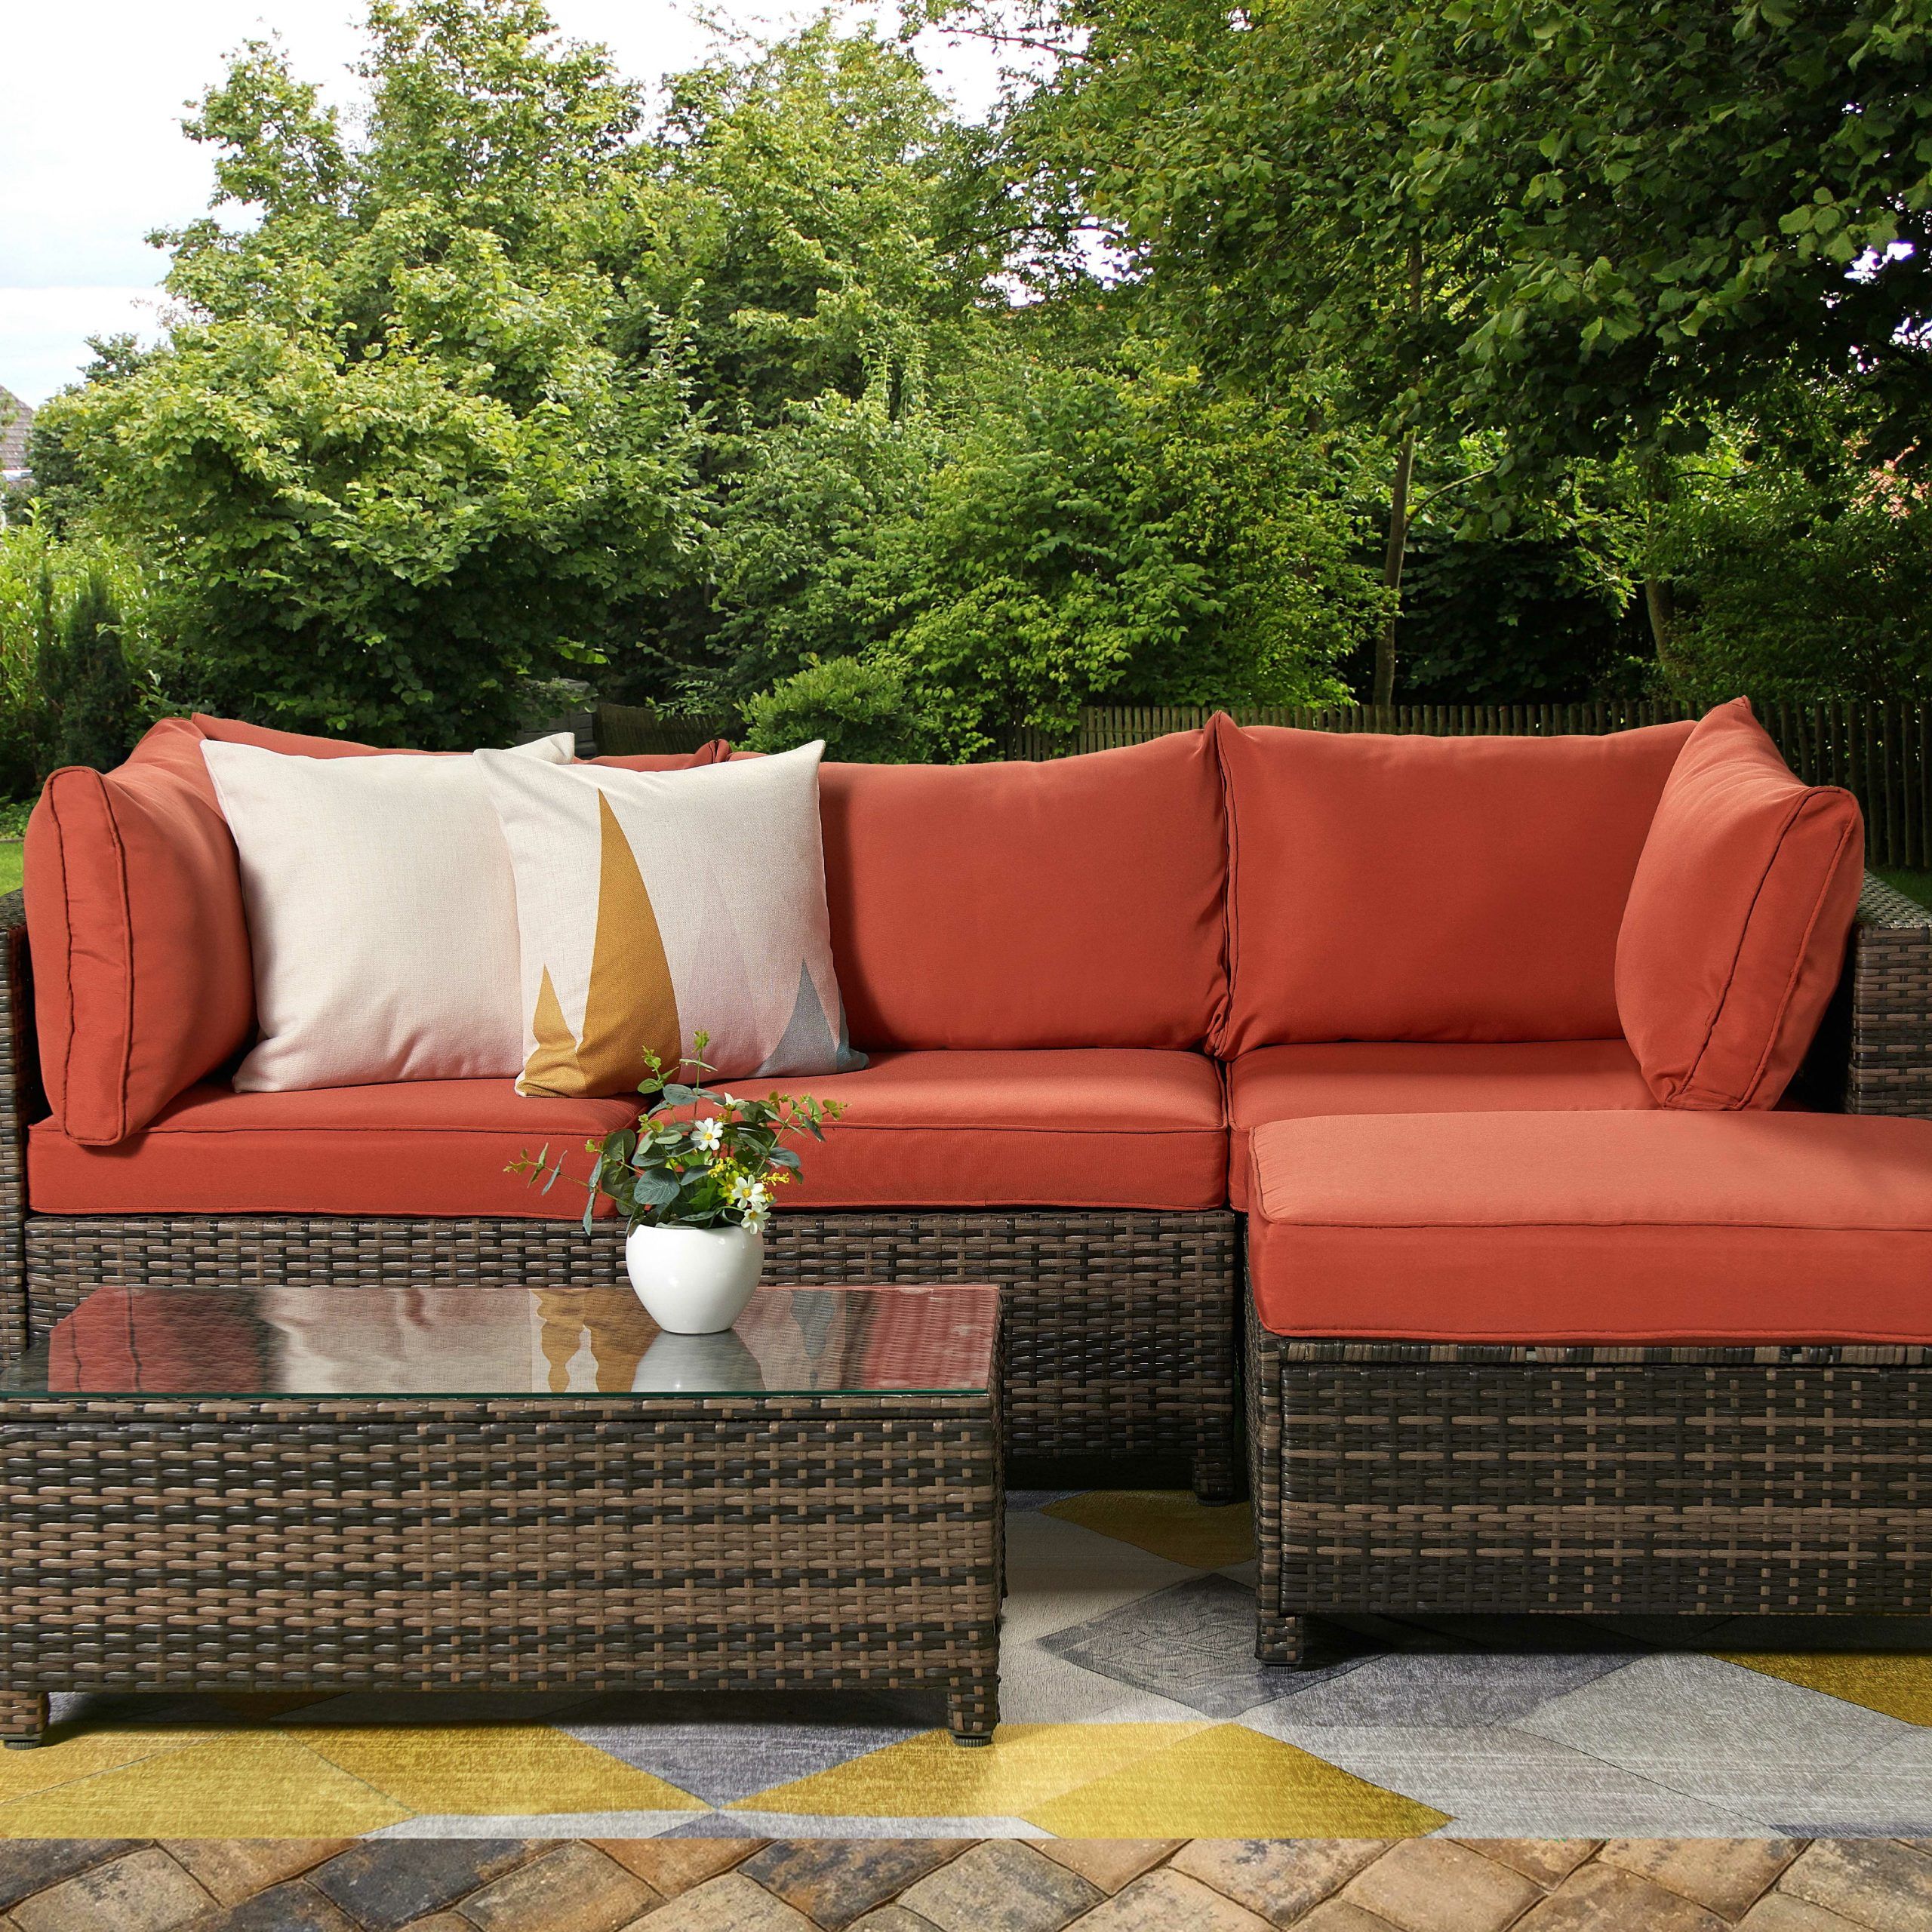 Lobdell Patio Sofas With Cushions For 2019 Roni Patio Sectional With Cushions (View 12 of 25)